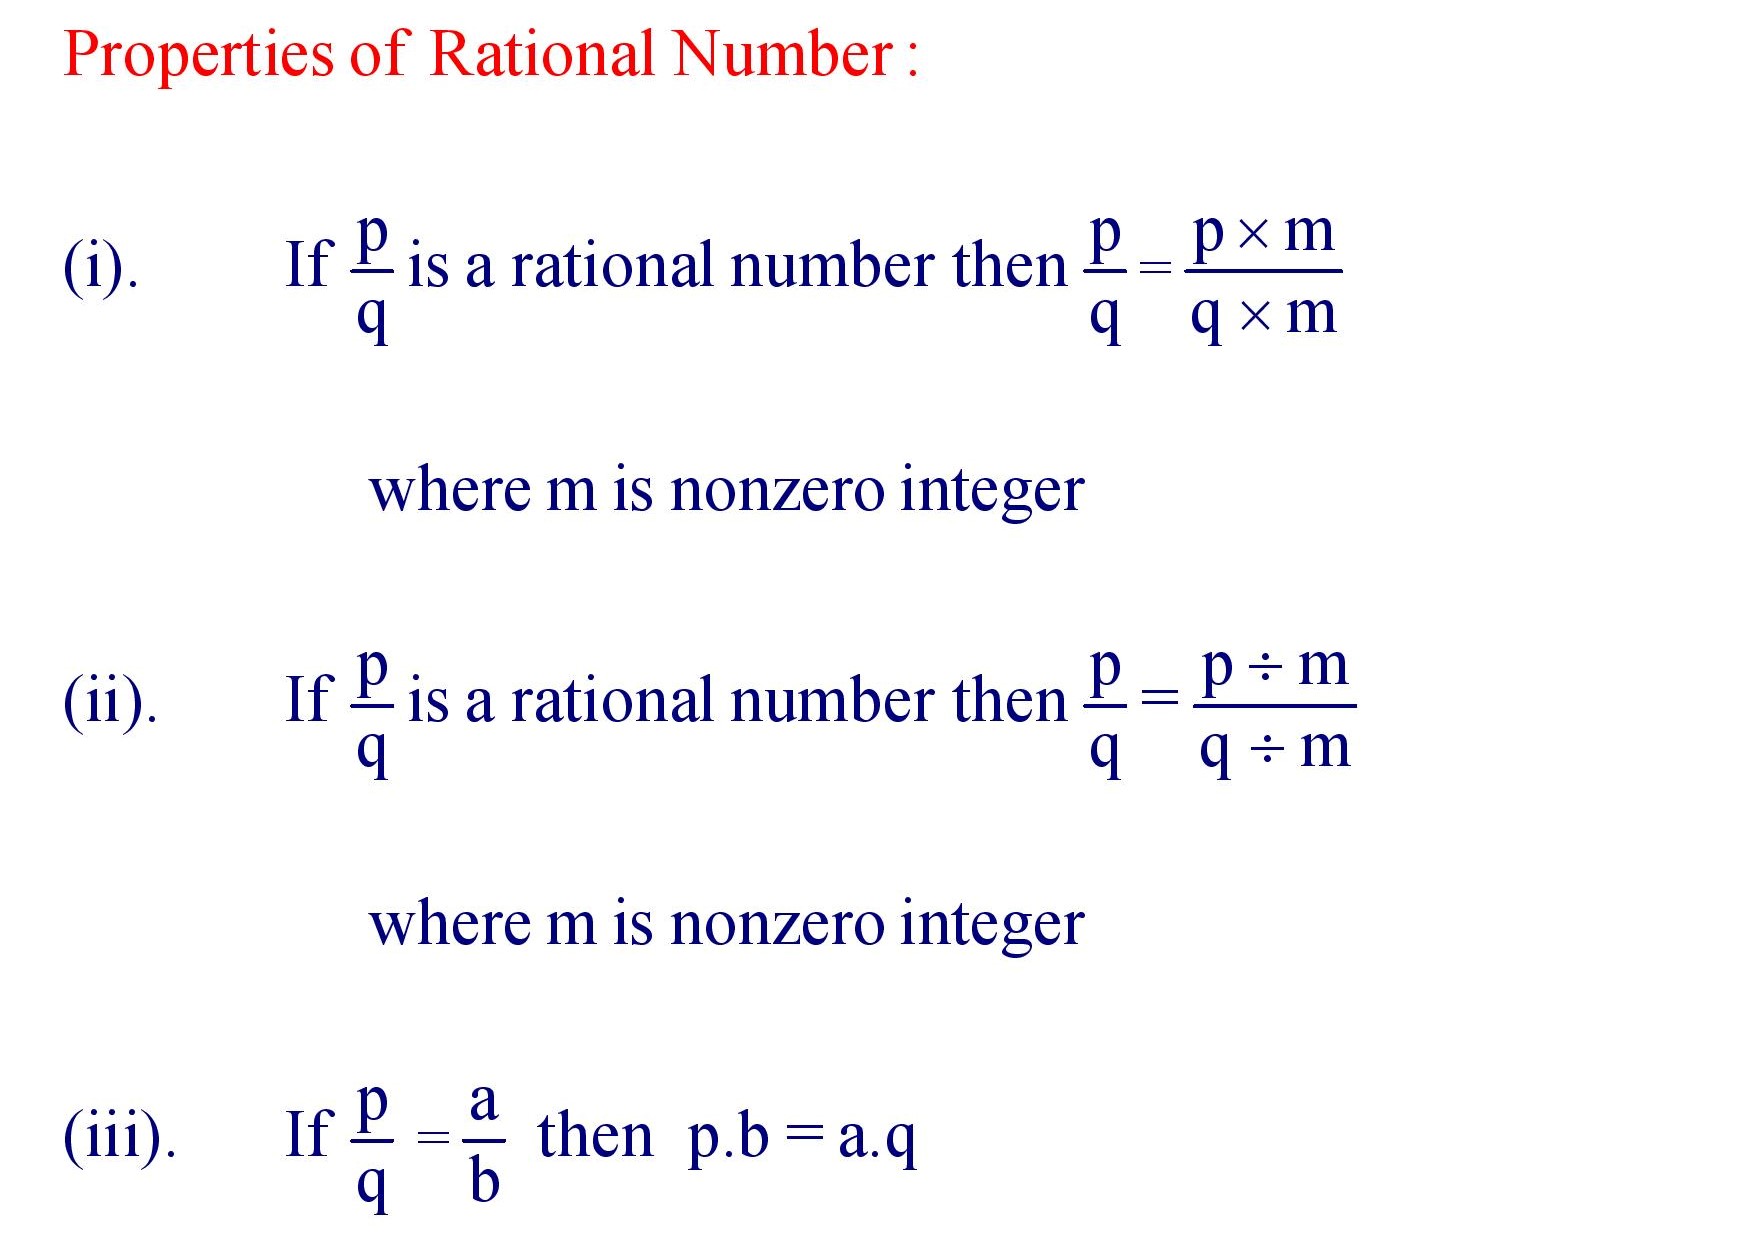 Properties of Rational Number